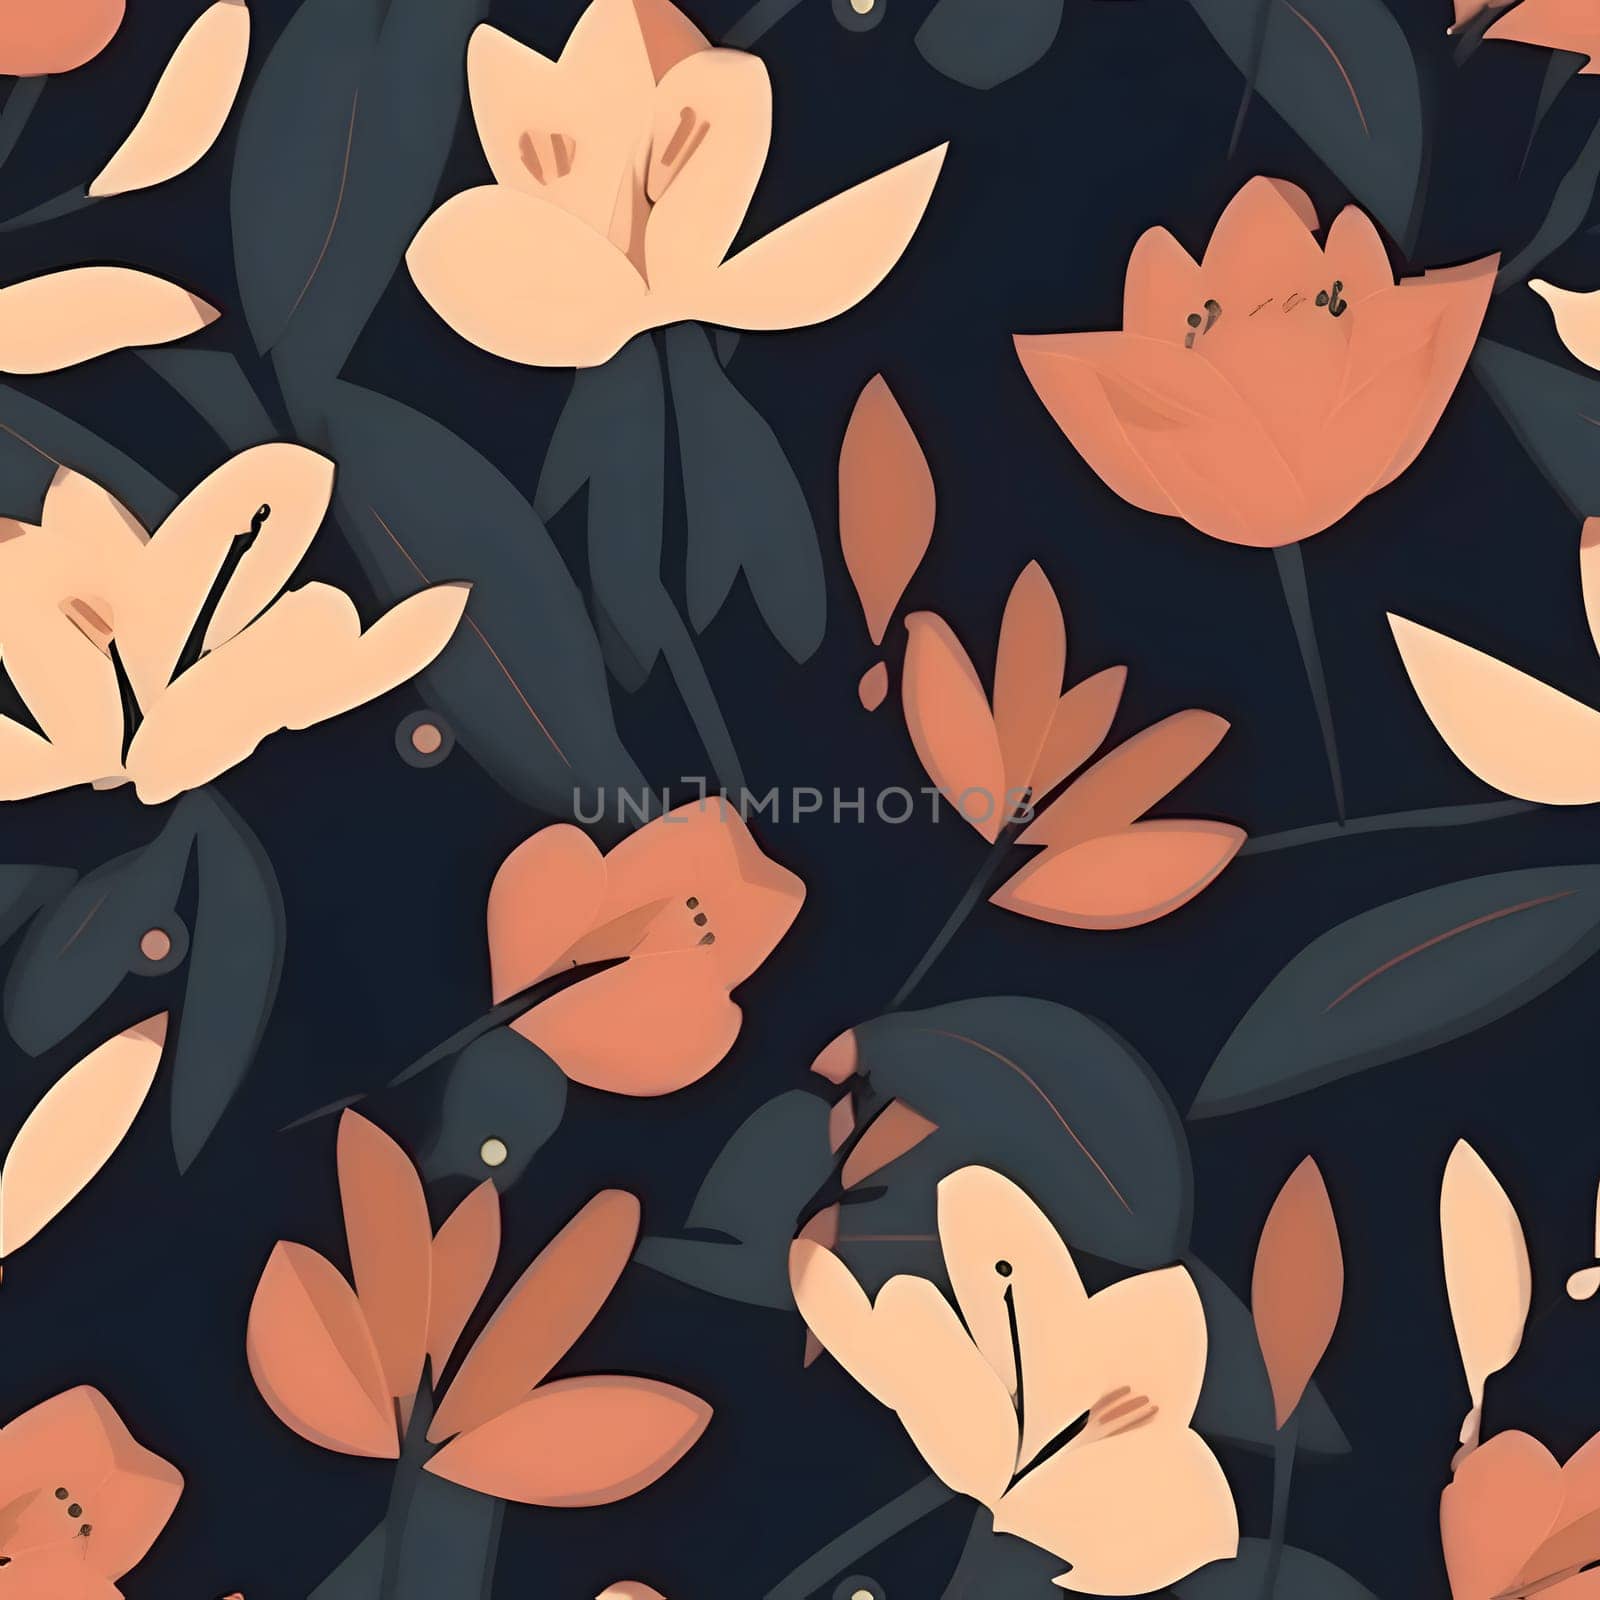 Patterns and banners backgrounds: Seamless pattern with flowers and leaves. Hand drawn vector illustration.